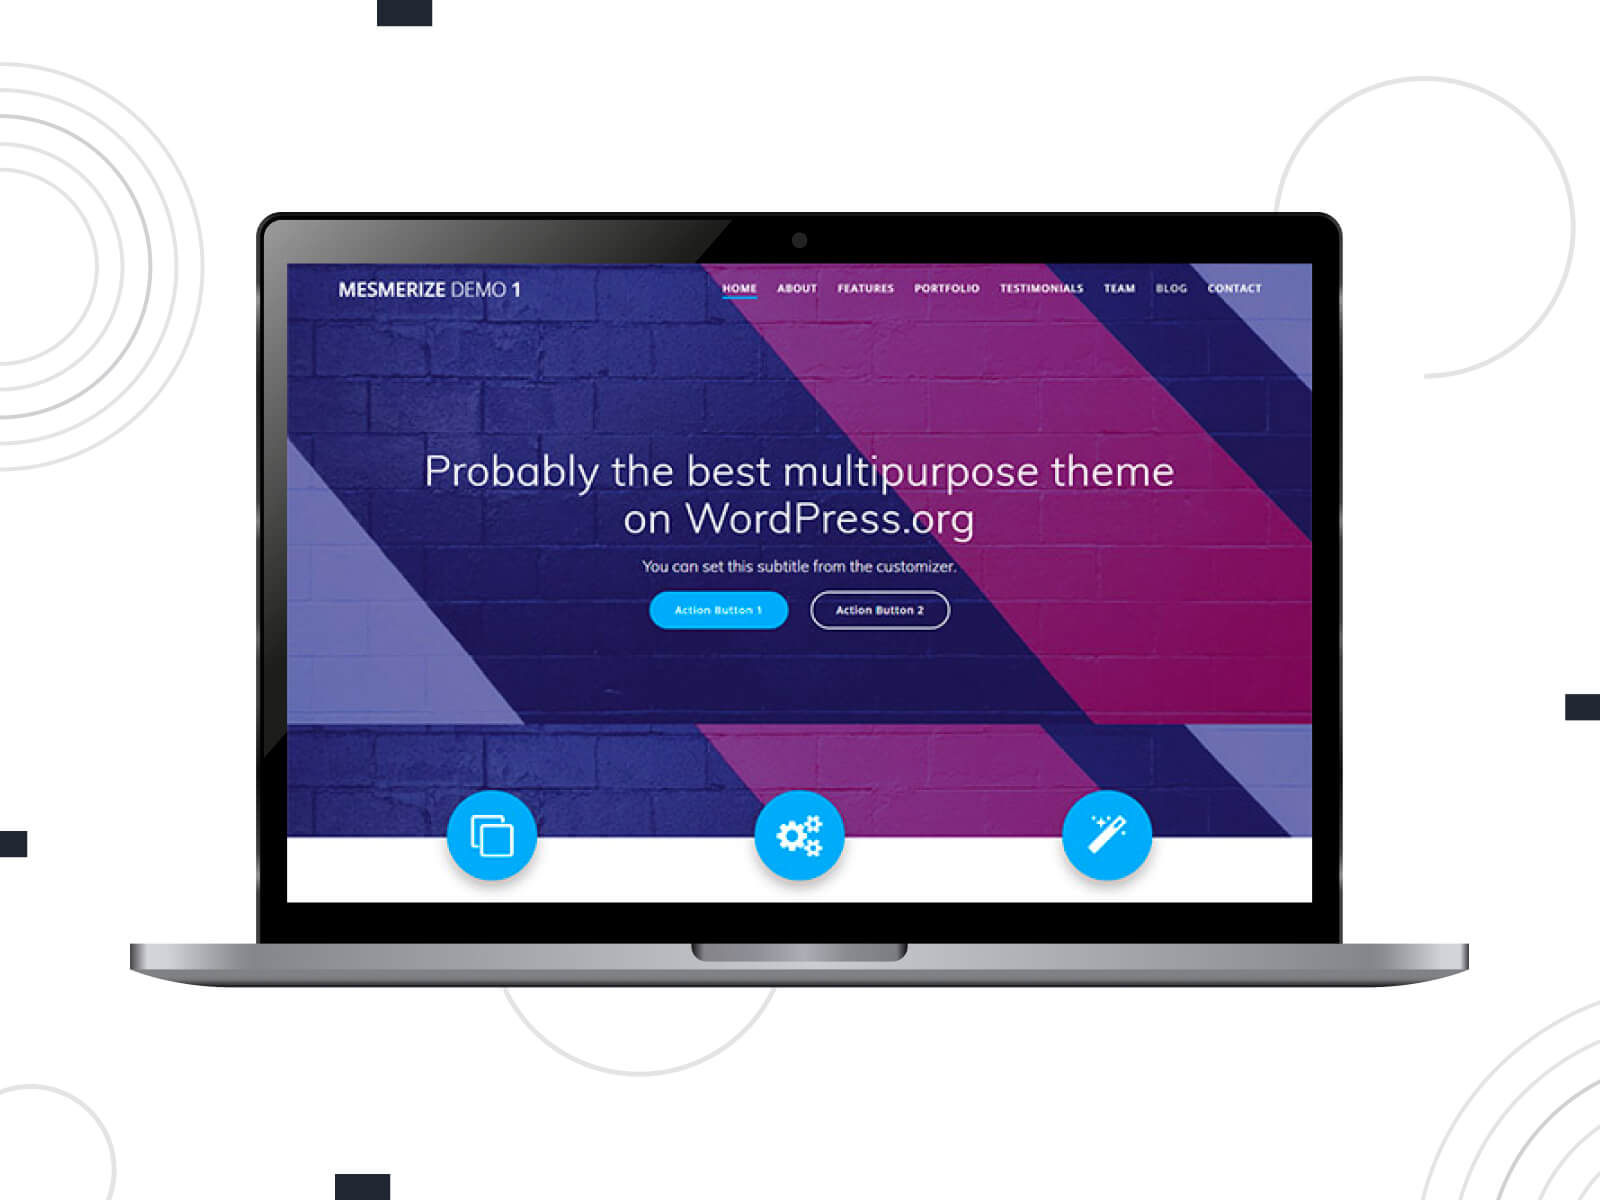 Illustration of Mesmerize - dim, crisp template that is touted as one of the premier WordPress themes for its SEO-optimized features, enhancing online visibility in purple, midnight blue, and dodger blue color gradation.